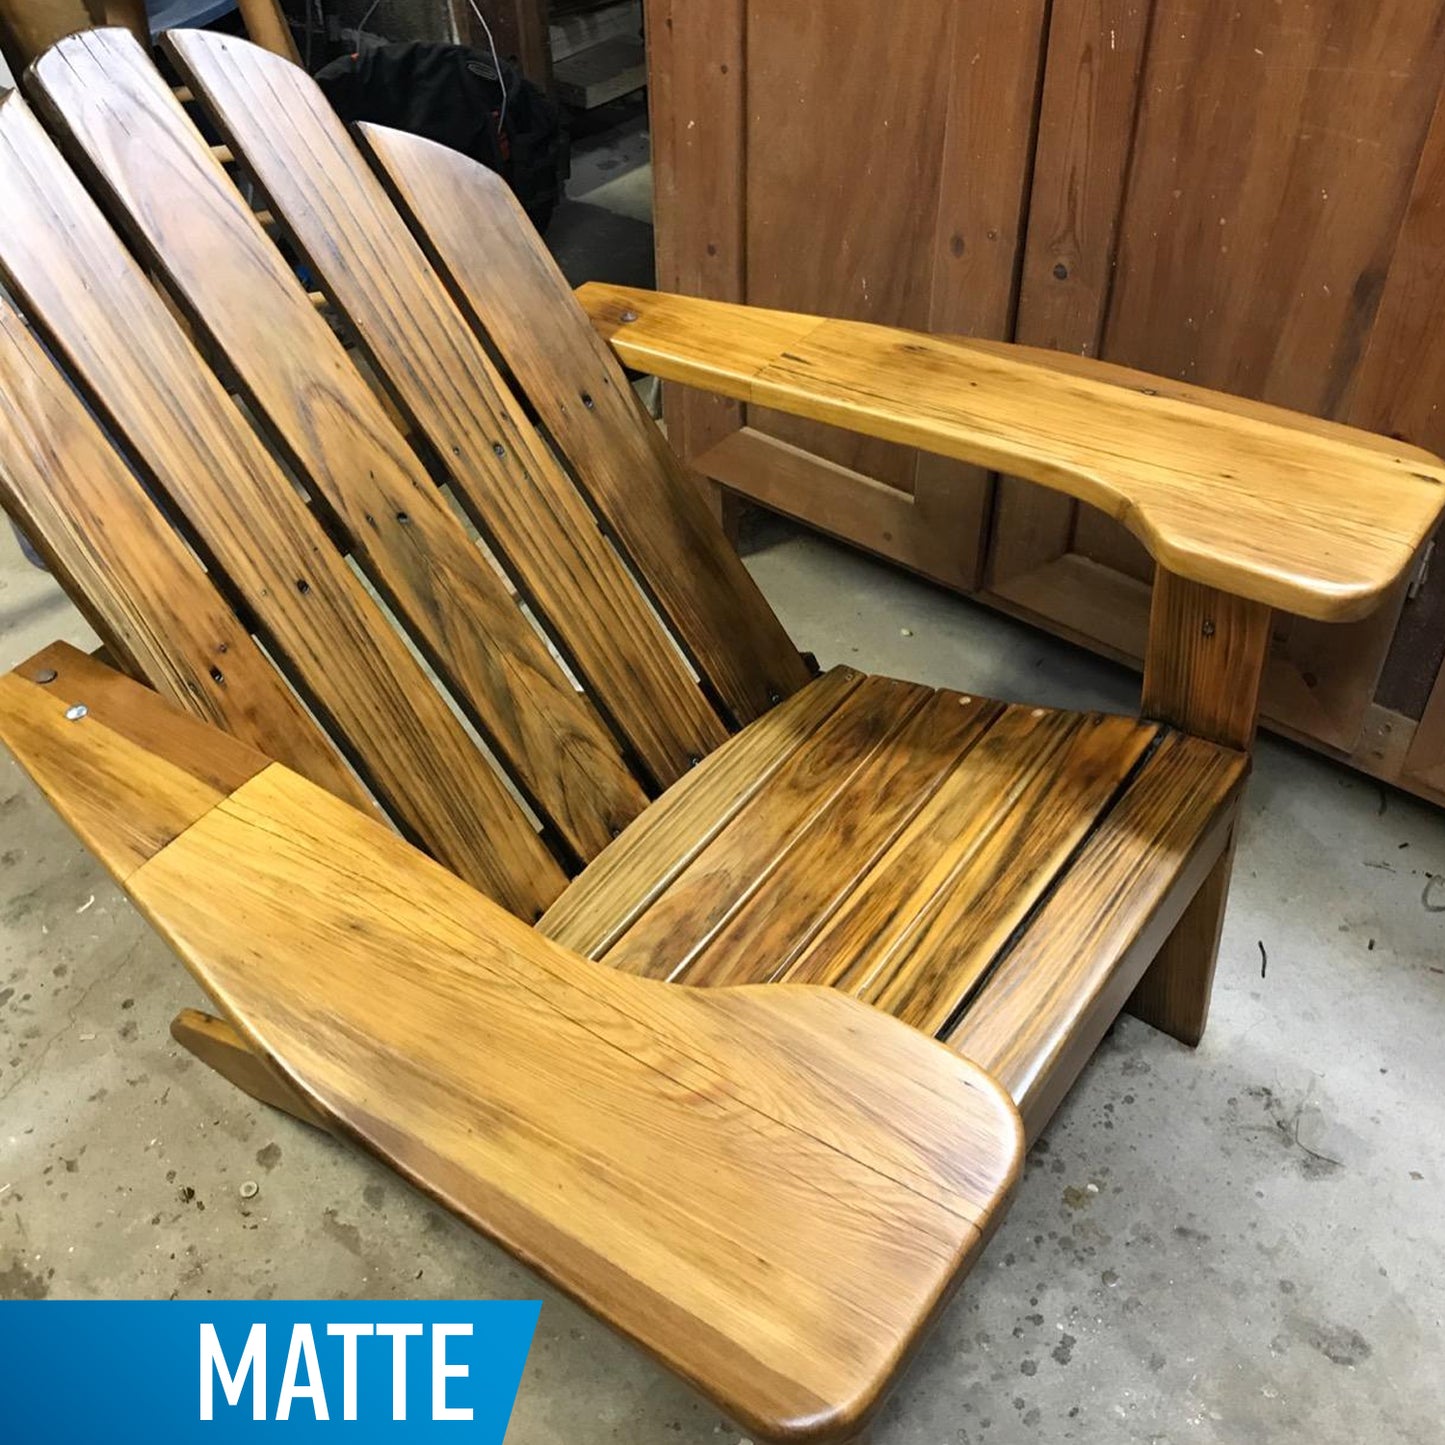 TotalBoat Lust Matte on an adirondack chair